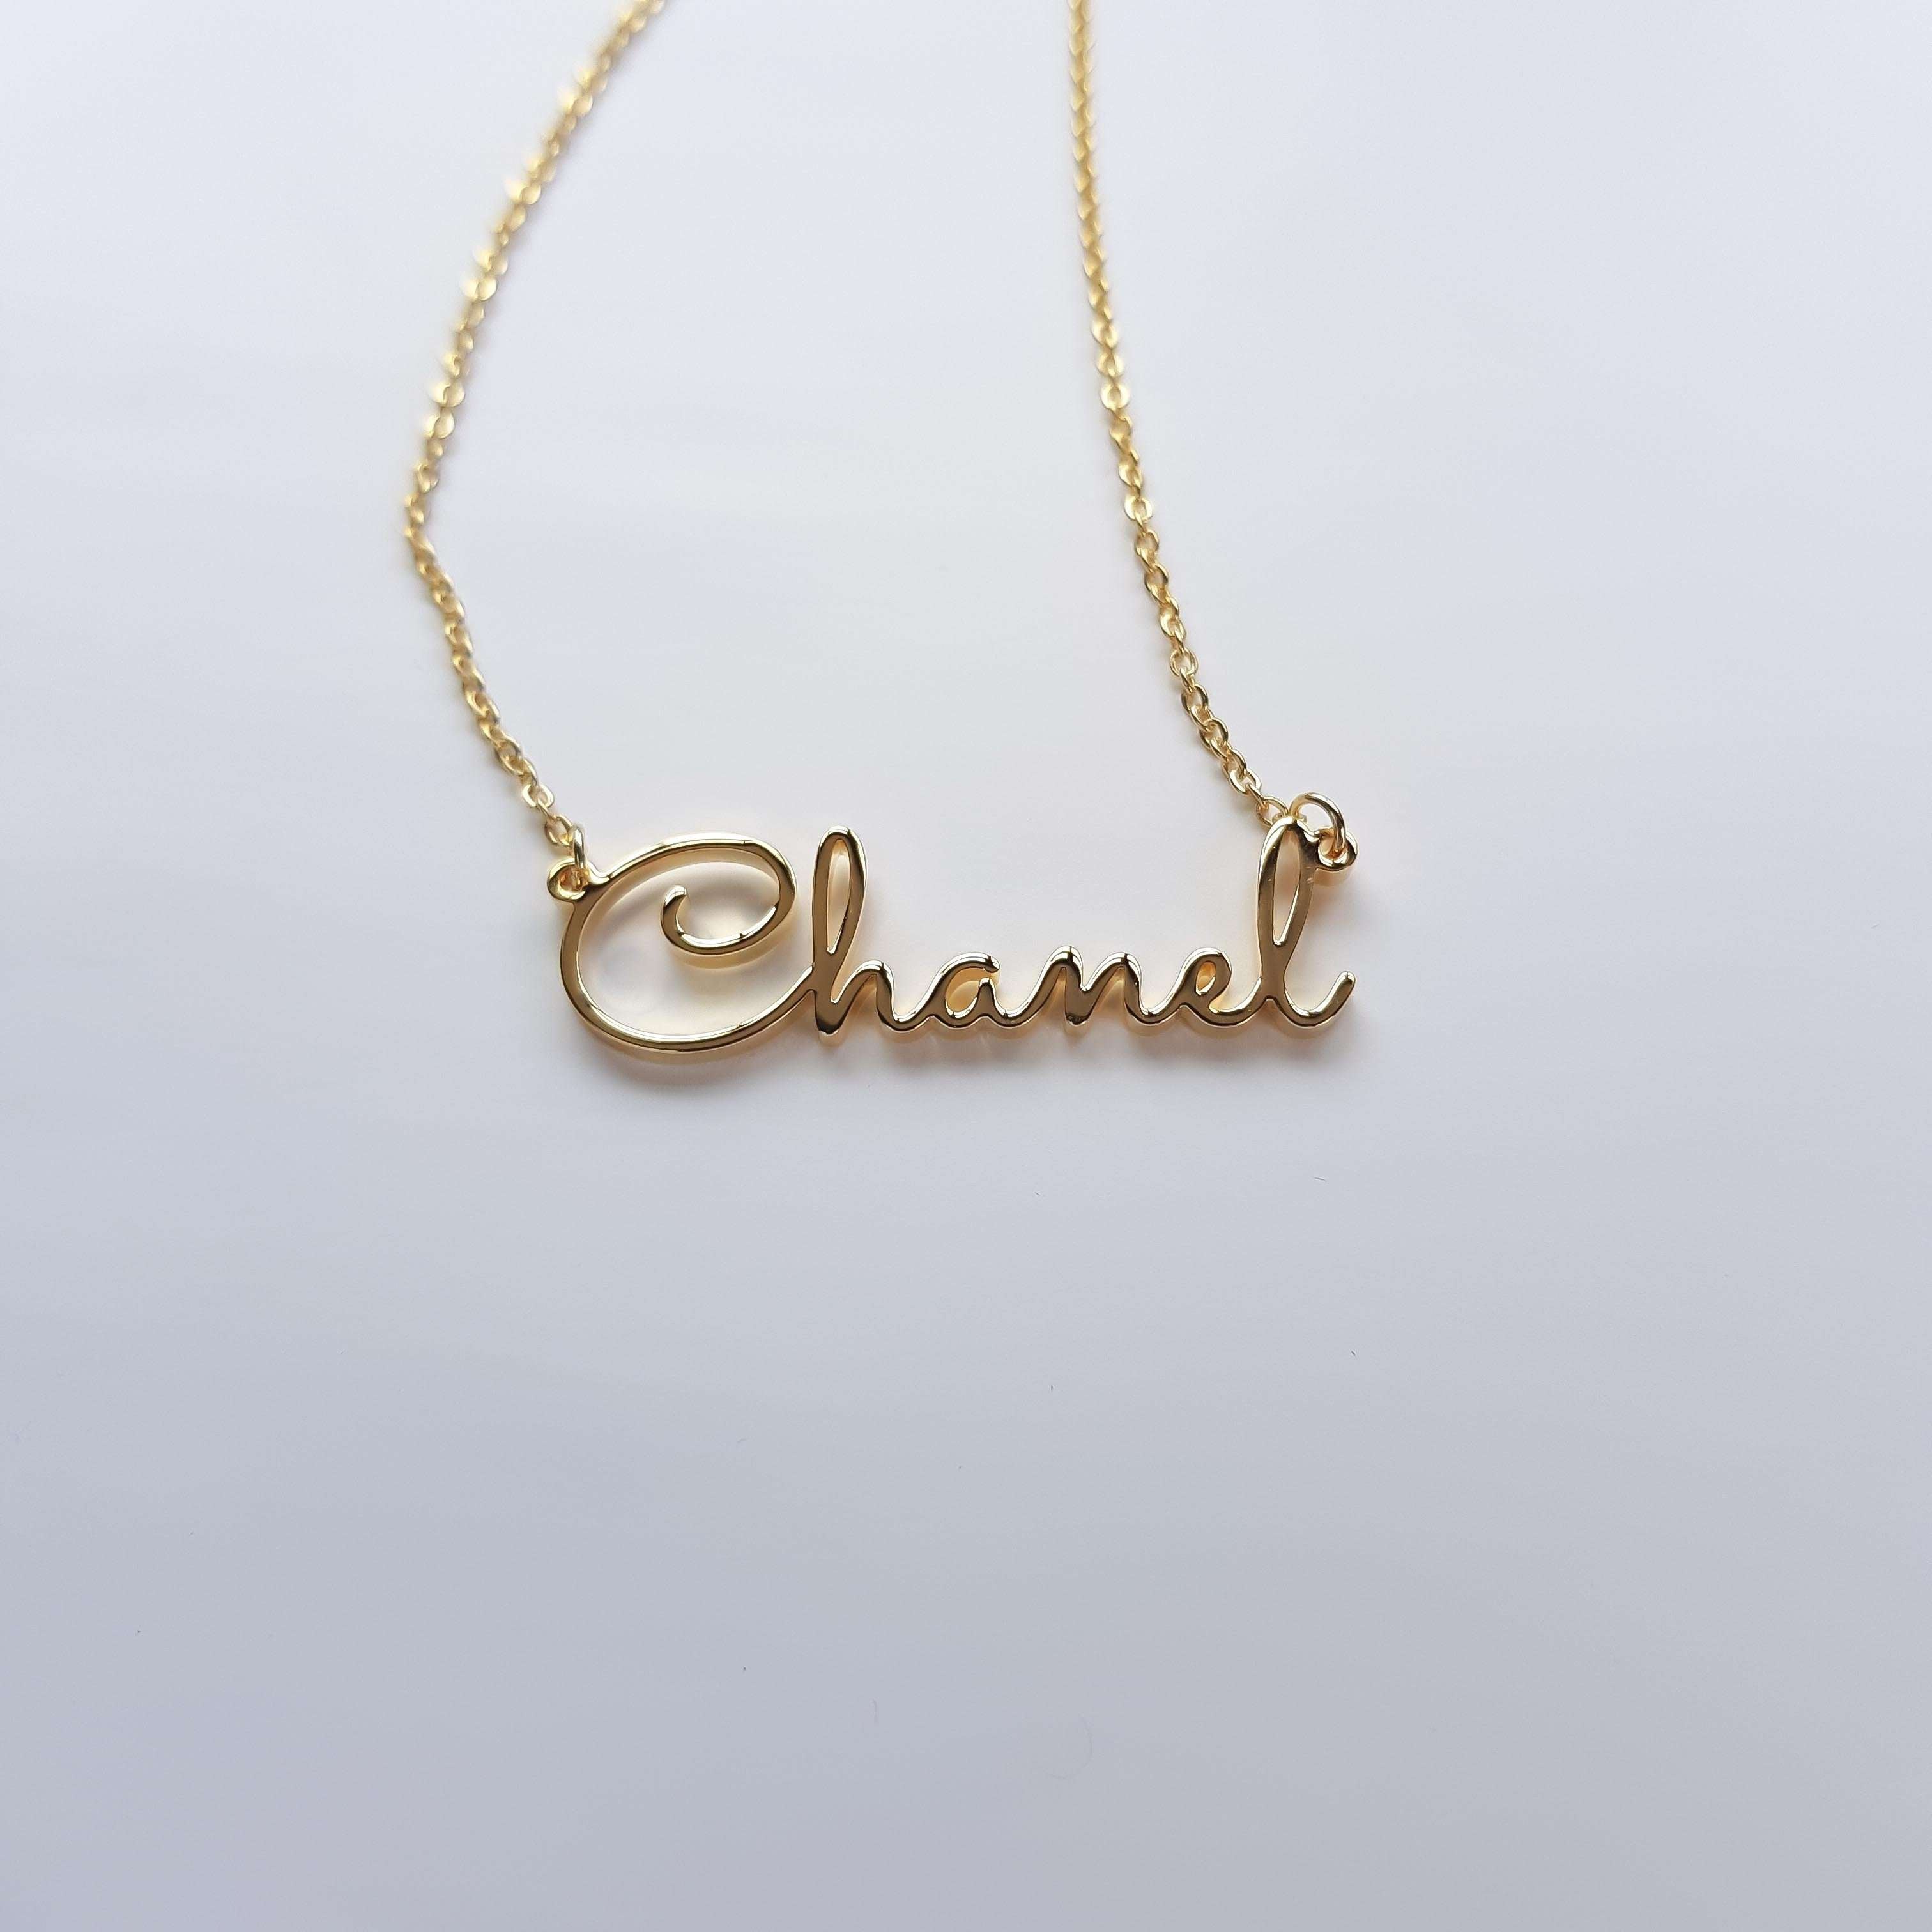 Gold Name Necklace that says Channel 